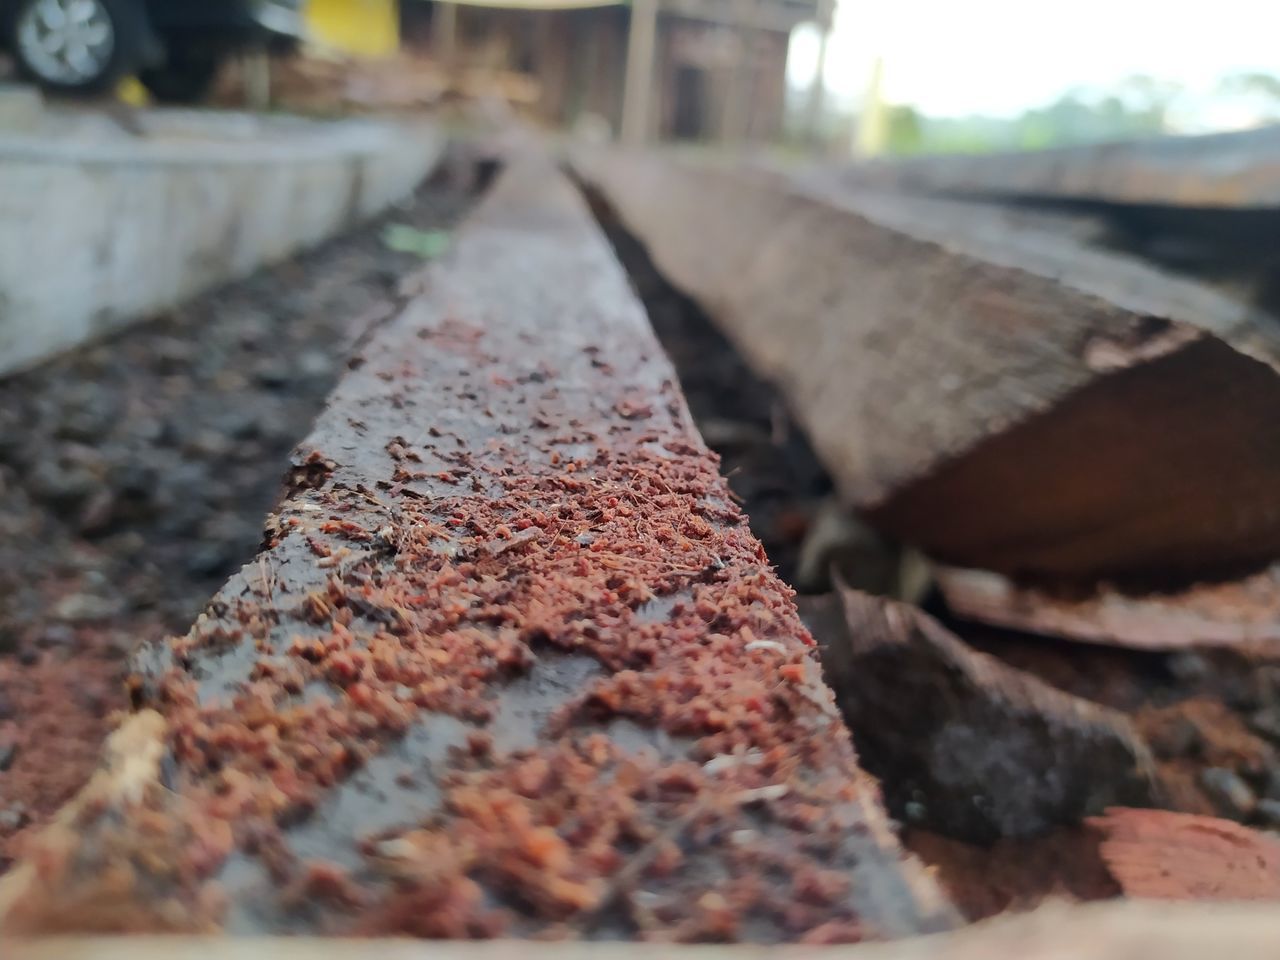 soil, selective focus, no people, industry, day, wood, close-up, transportation, rusty, nature, metal, outdoors, architecture, iron, focus on foreground, construction industry, track, vehicle